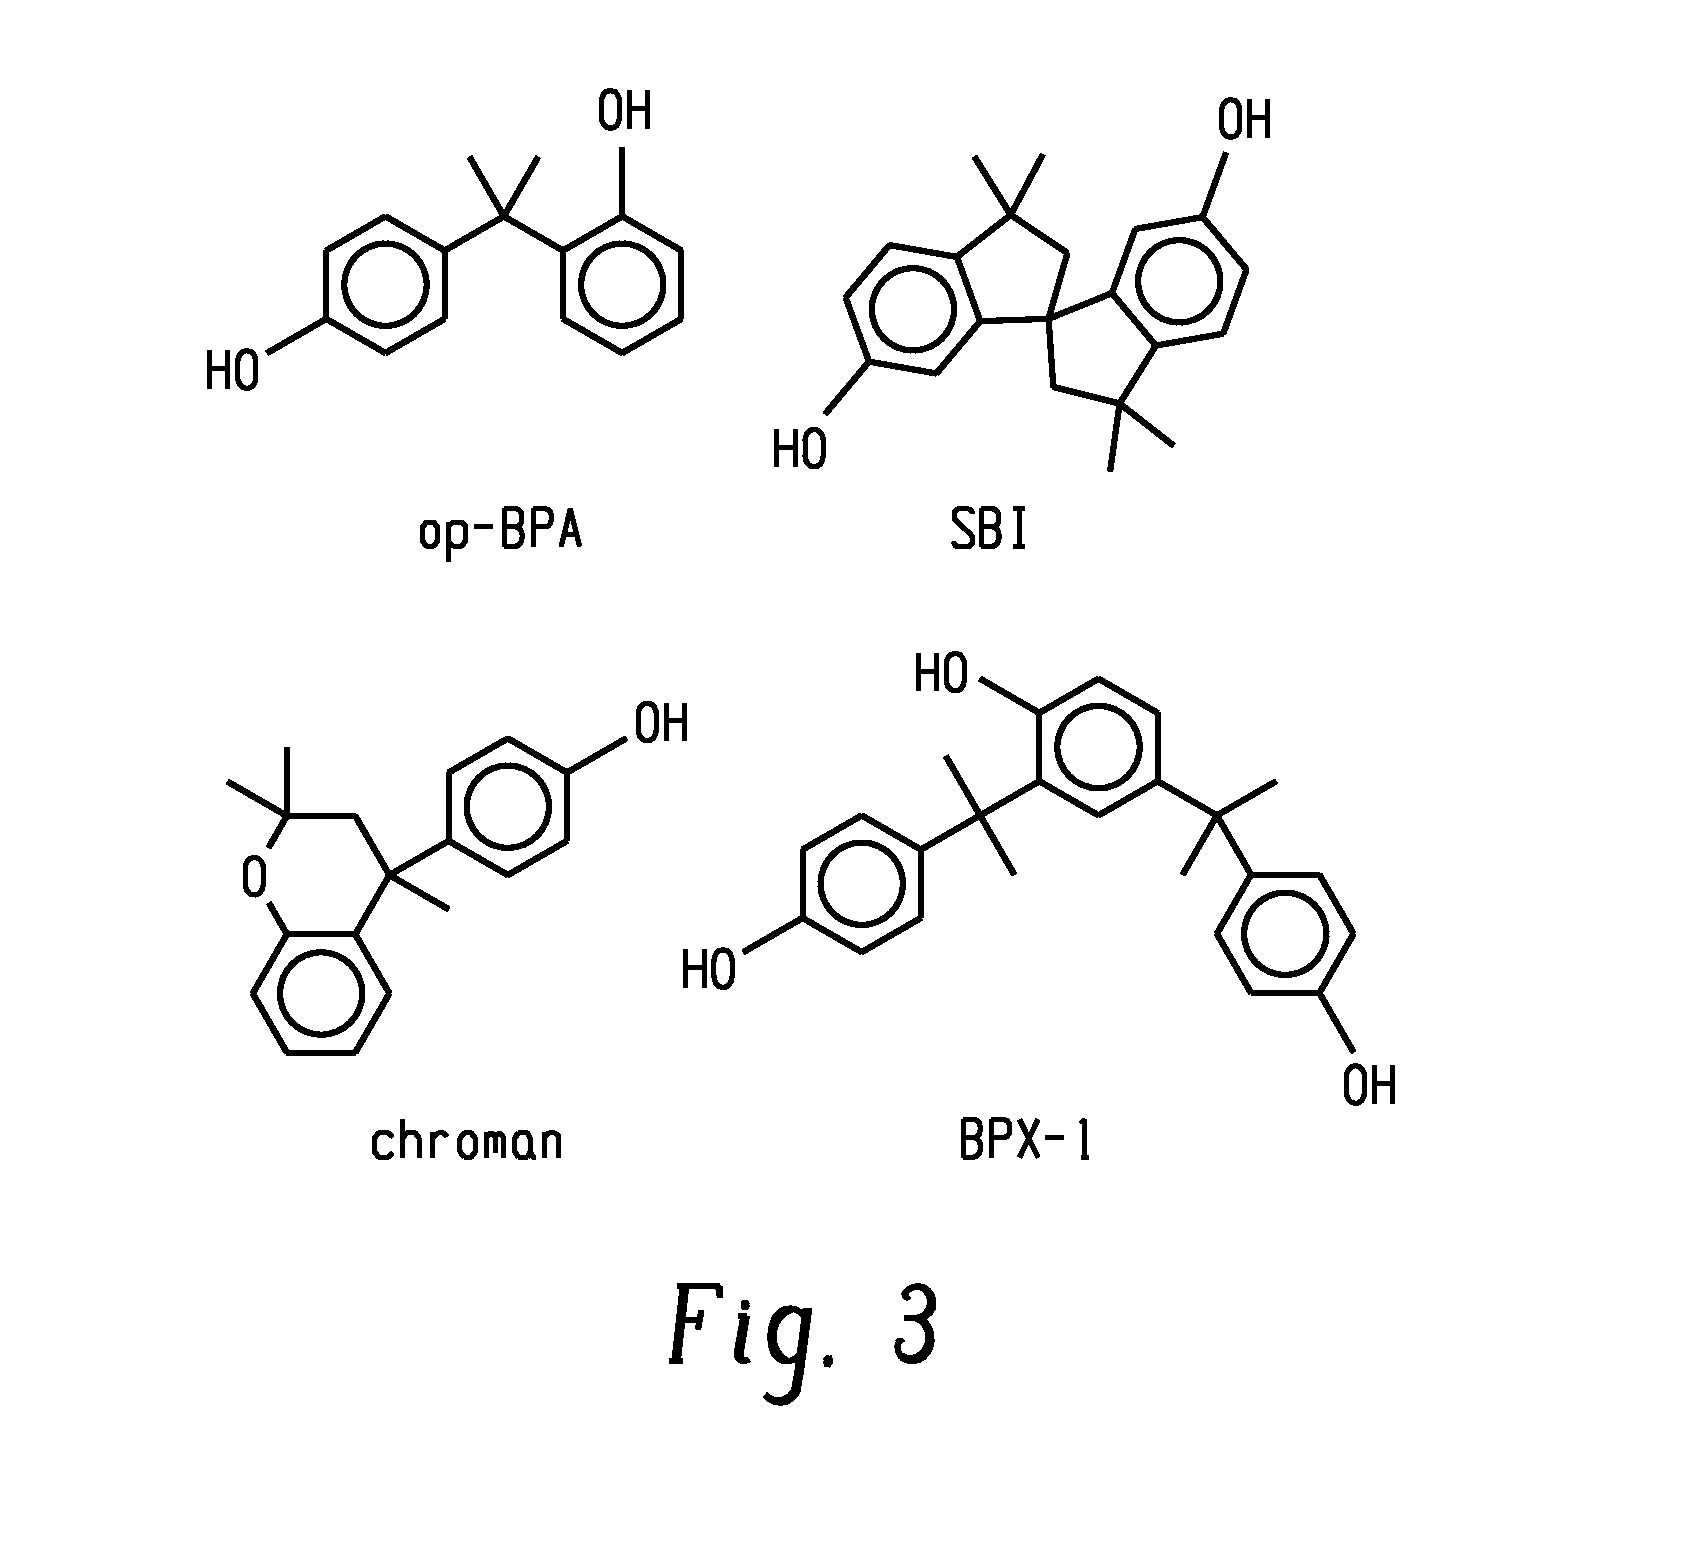 Polycarbonate compositions containing converions material chemistry and having enhanced optical properties, methods of making and articles comprising the same